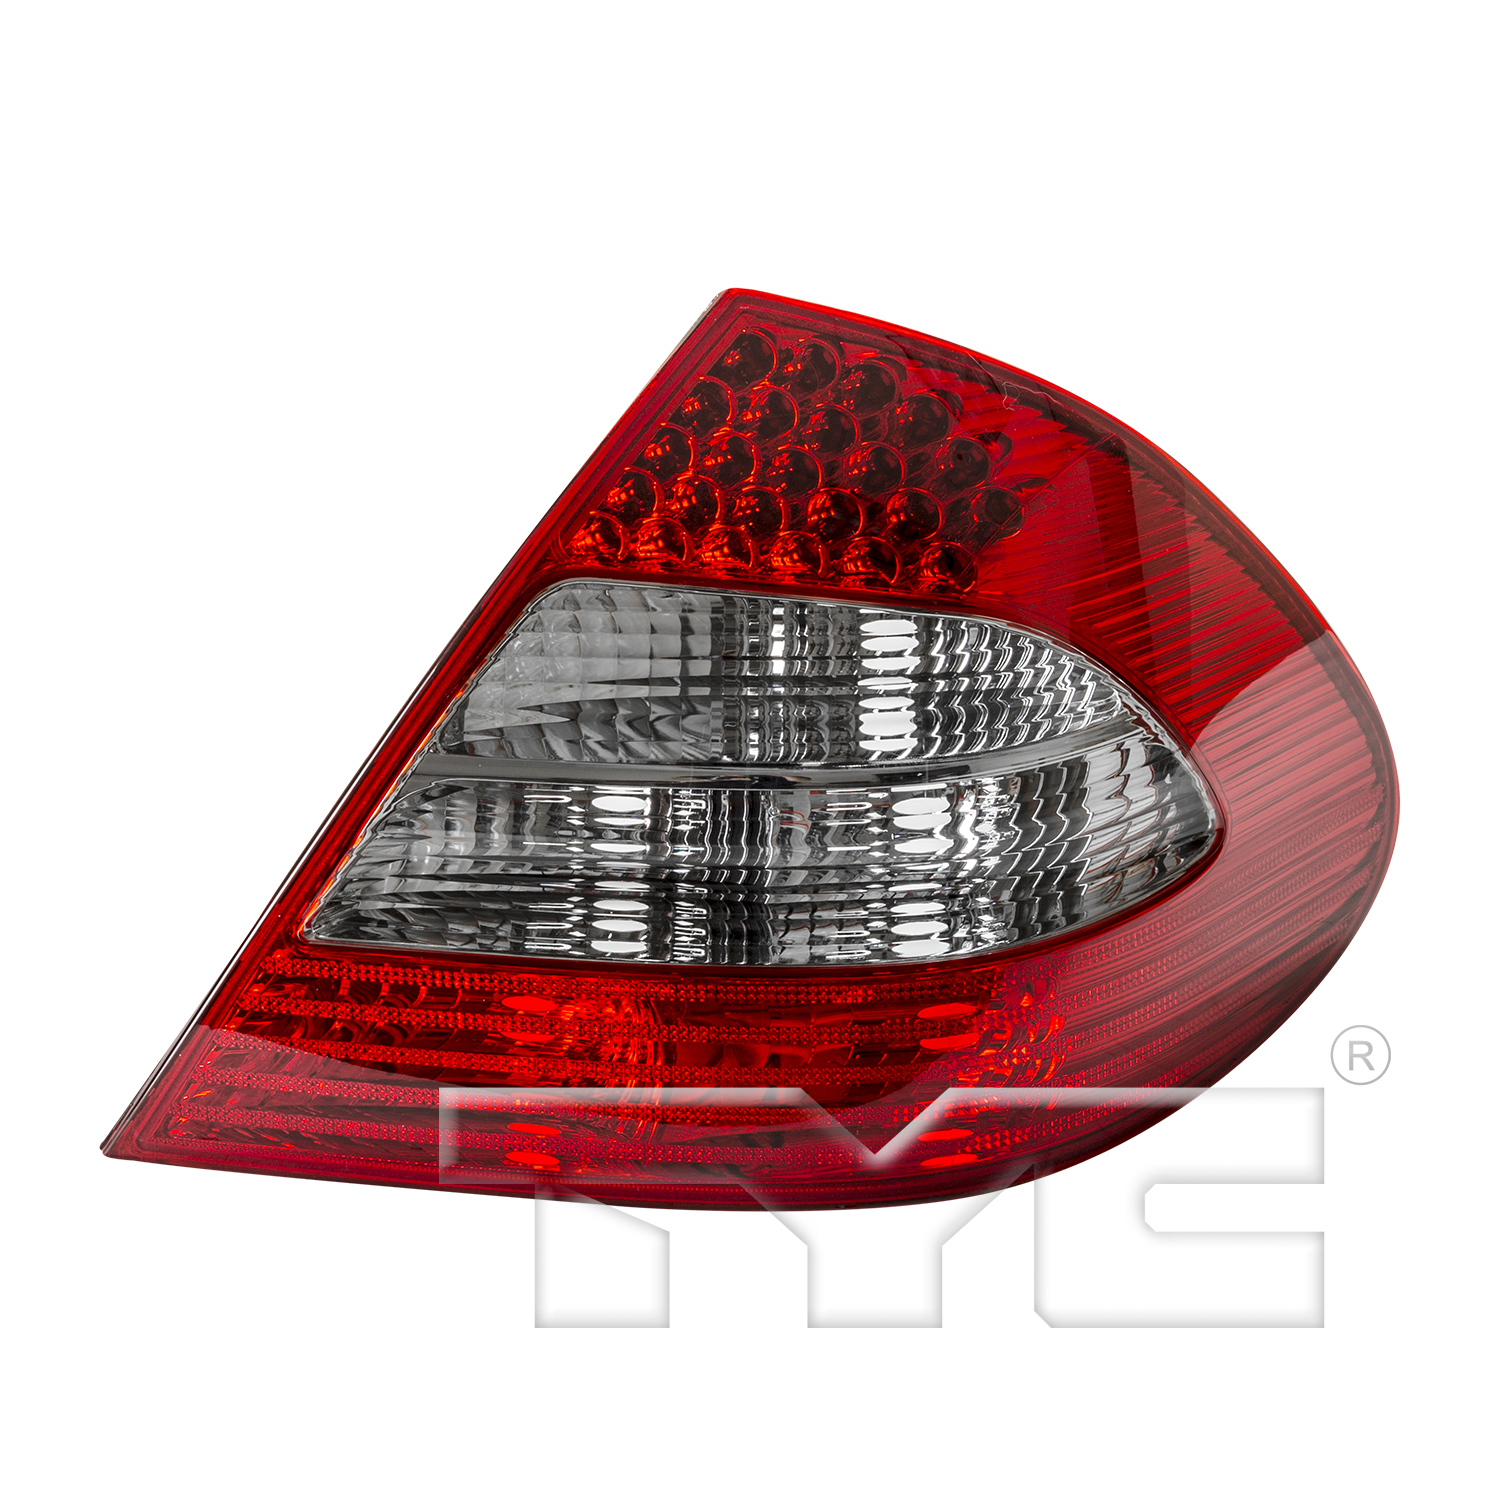 Aftermarket TAILLIGHTS for MERCEDES-BENZ - E350, E350,07-09,RT Taillamp assy